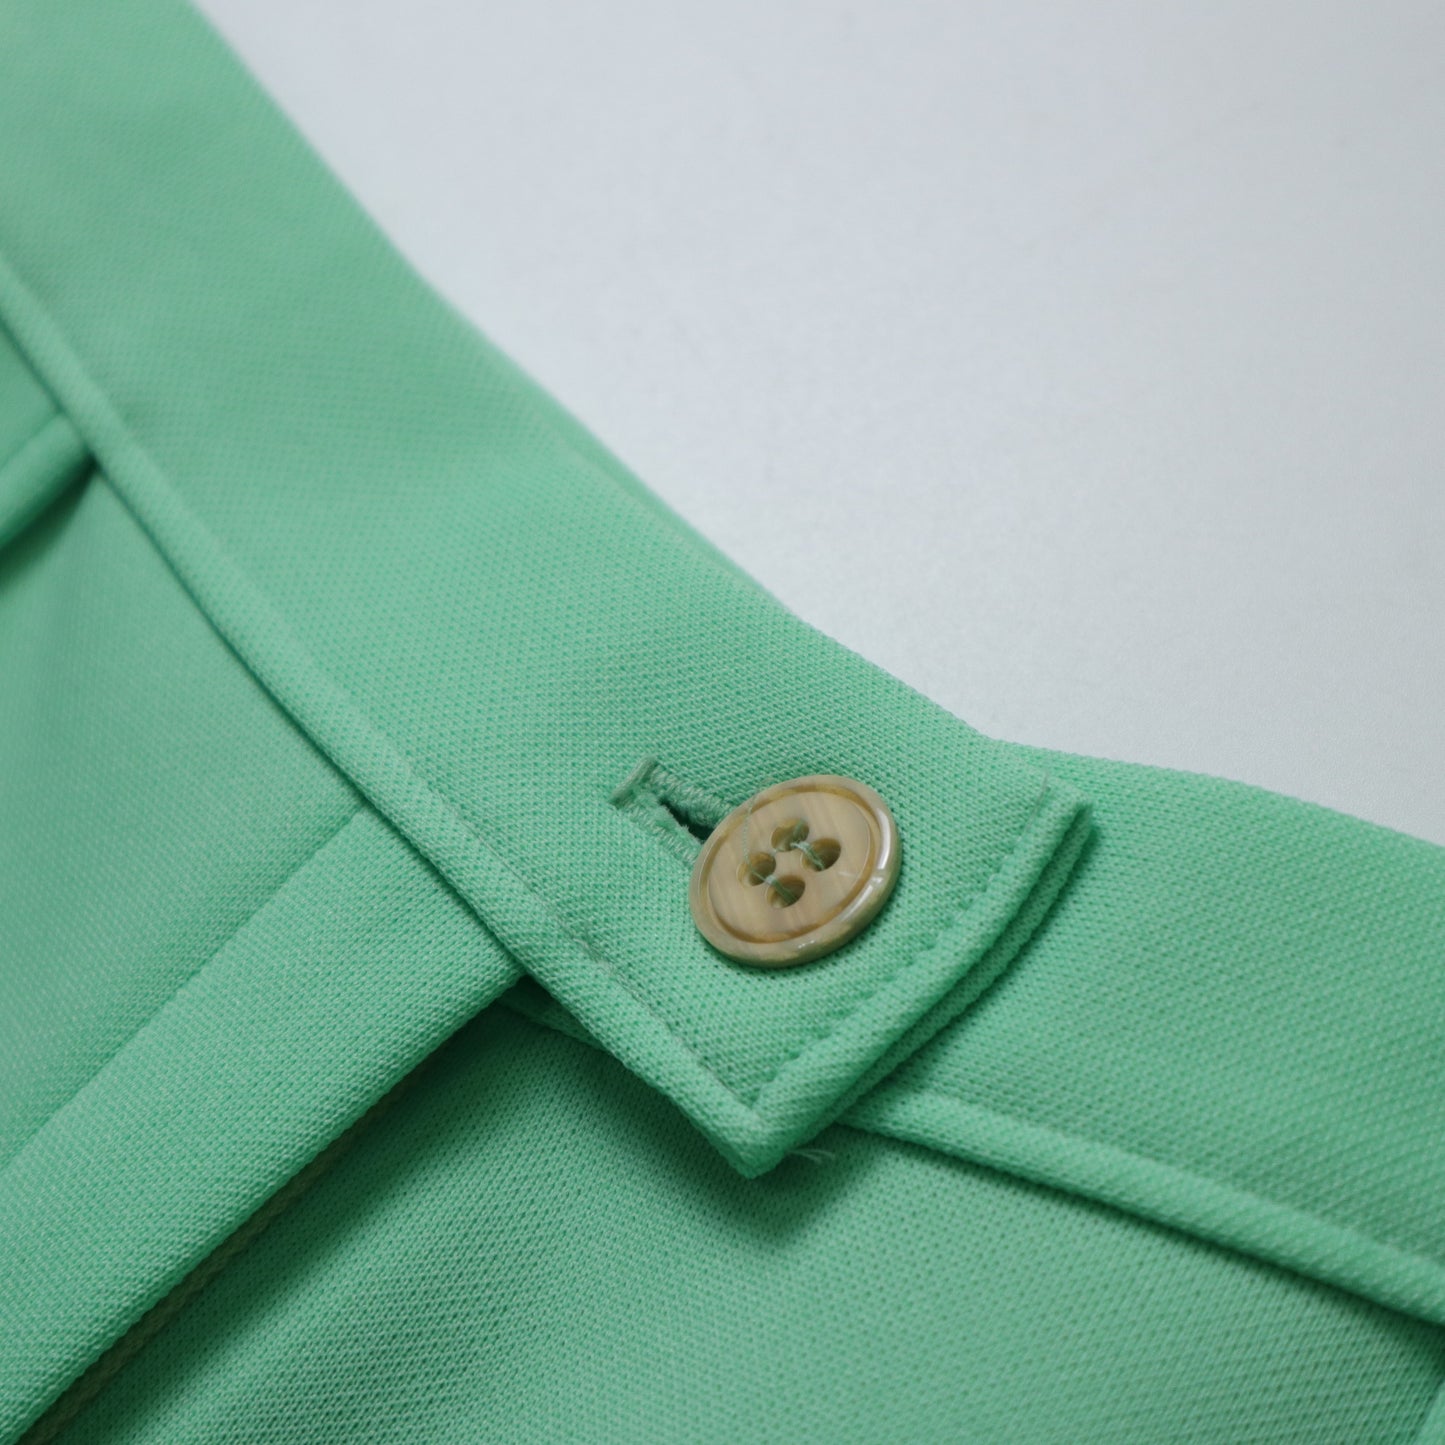 (26-27w) 1980s American mint green three-quarter wide pants with three-dimensional pockets